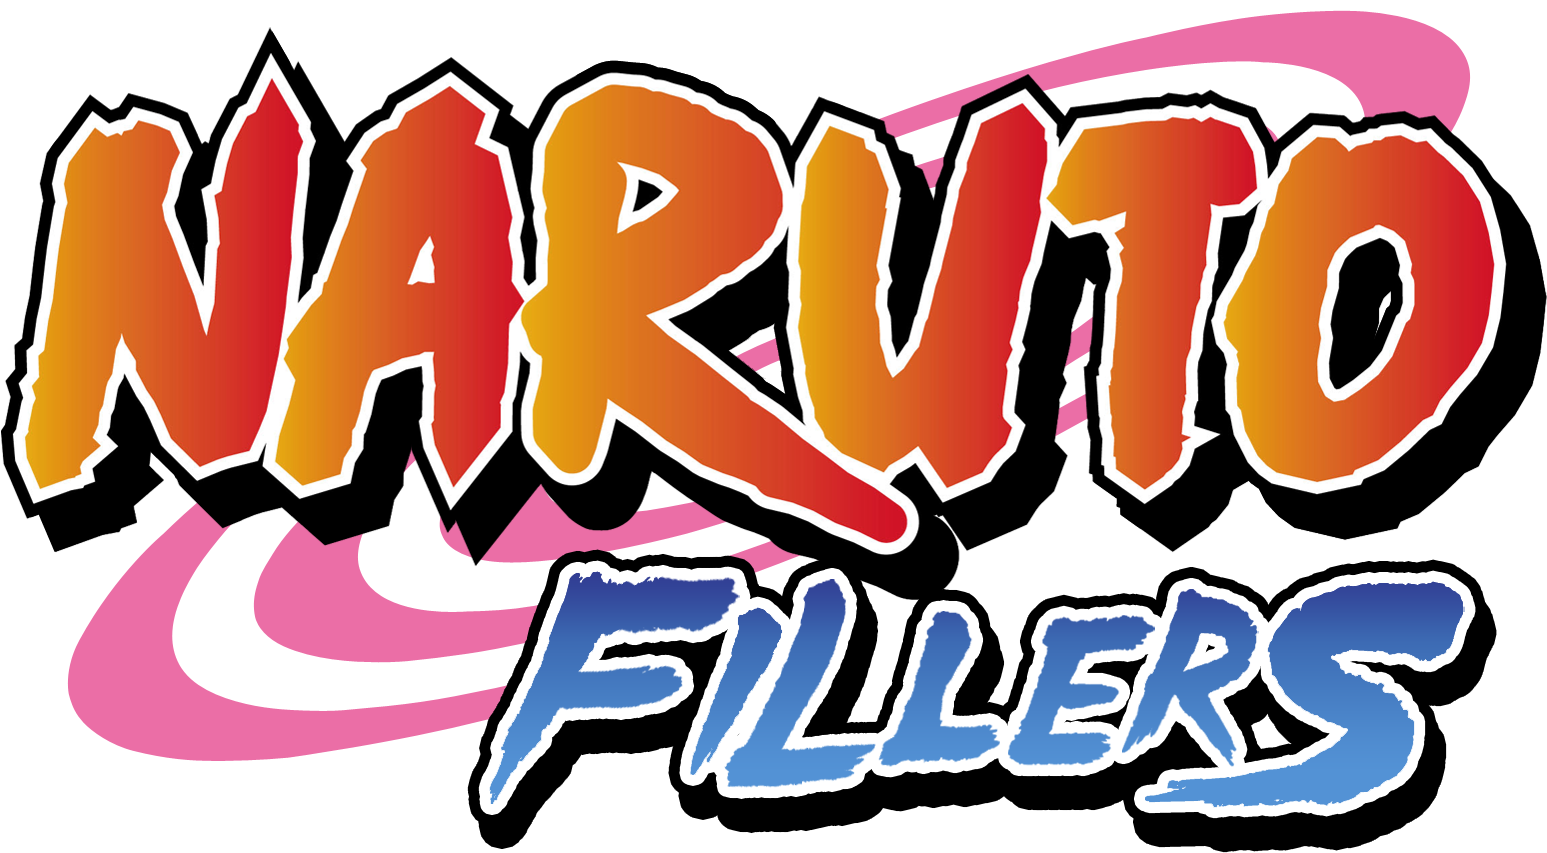 naruto shippuden logo png 10 free Cliparts | Download images on